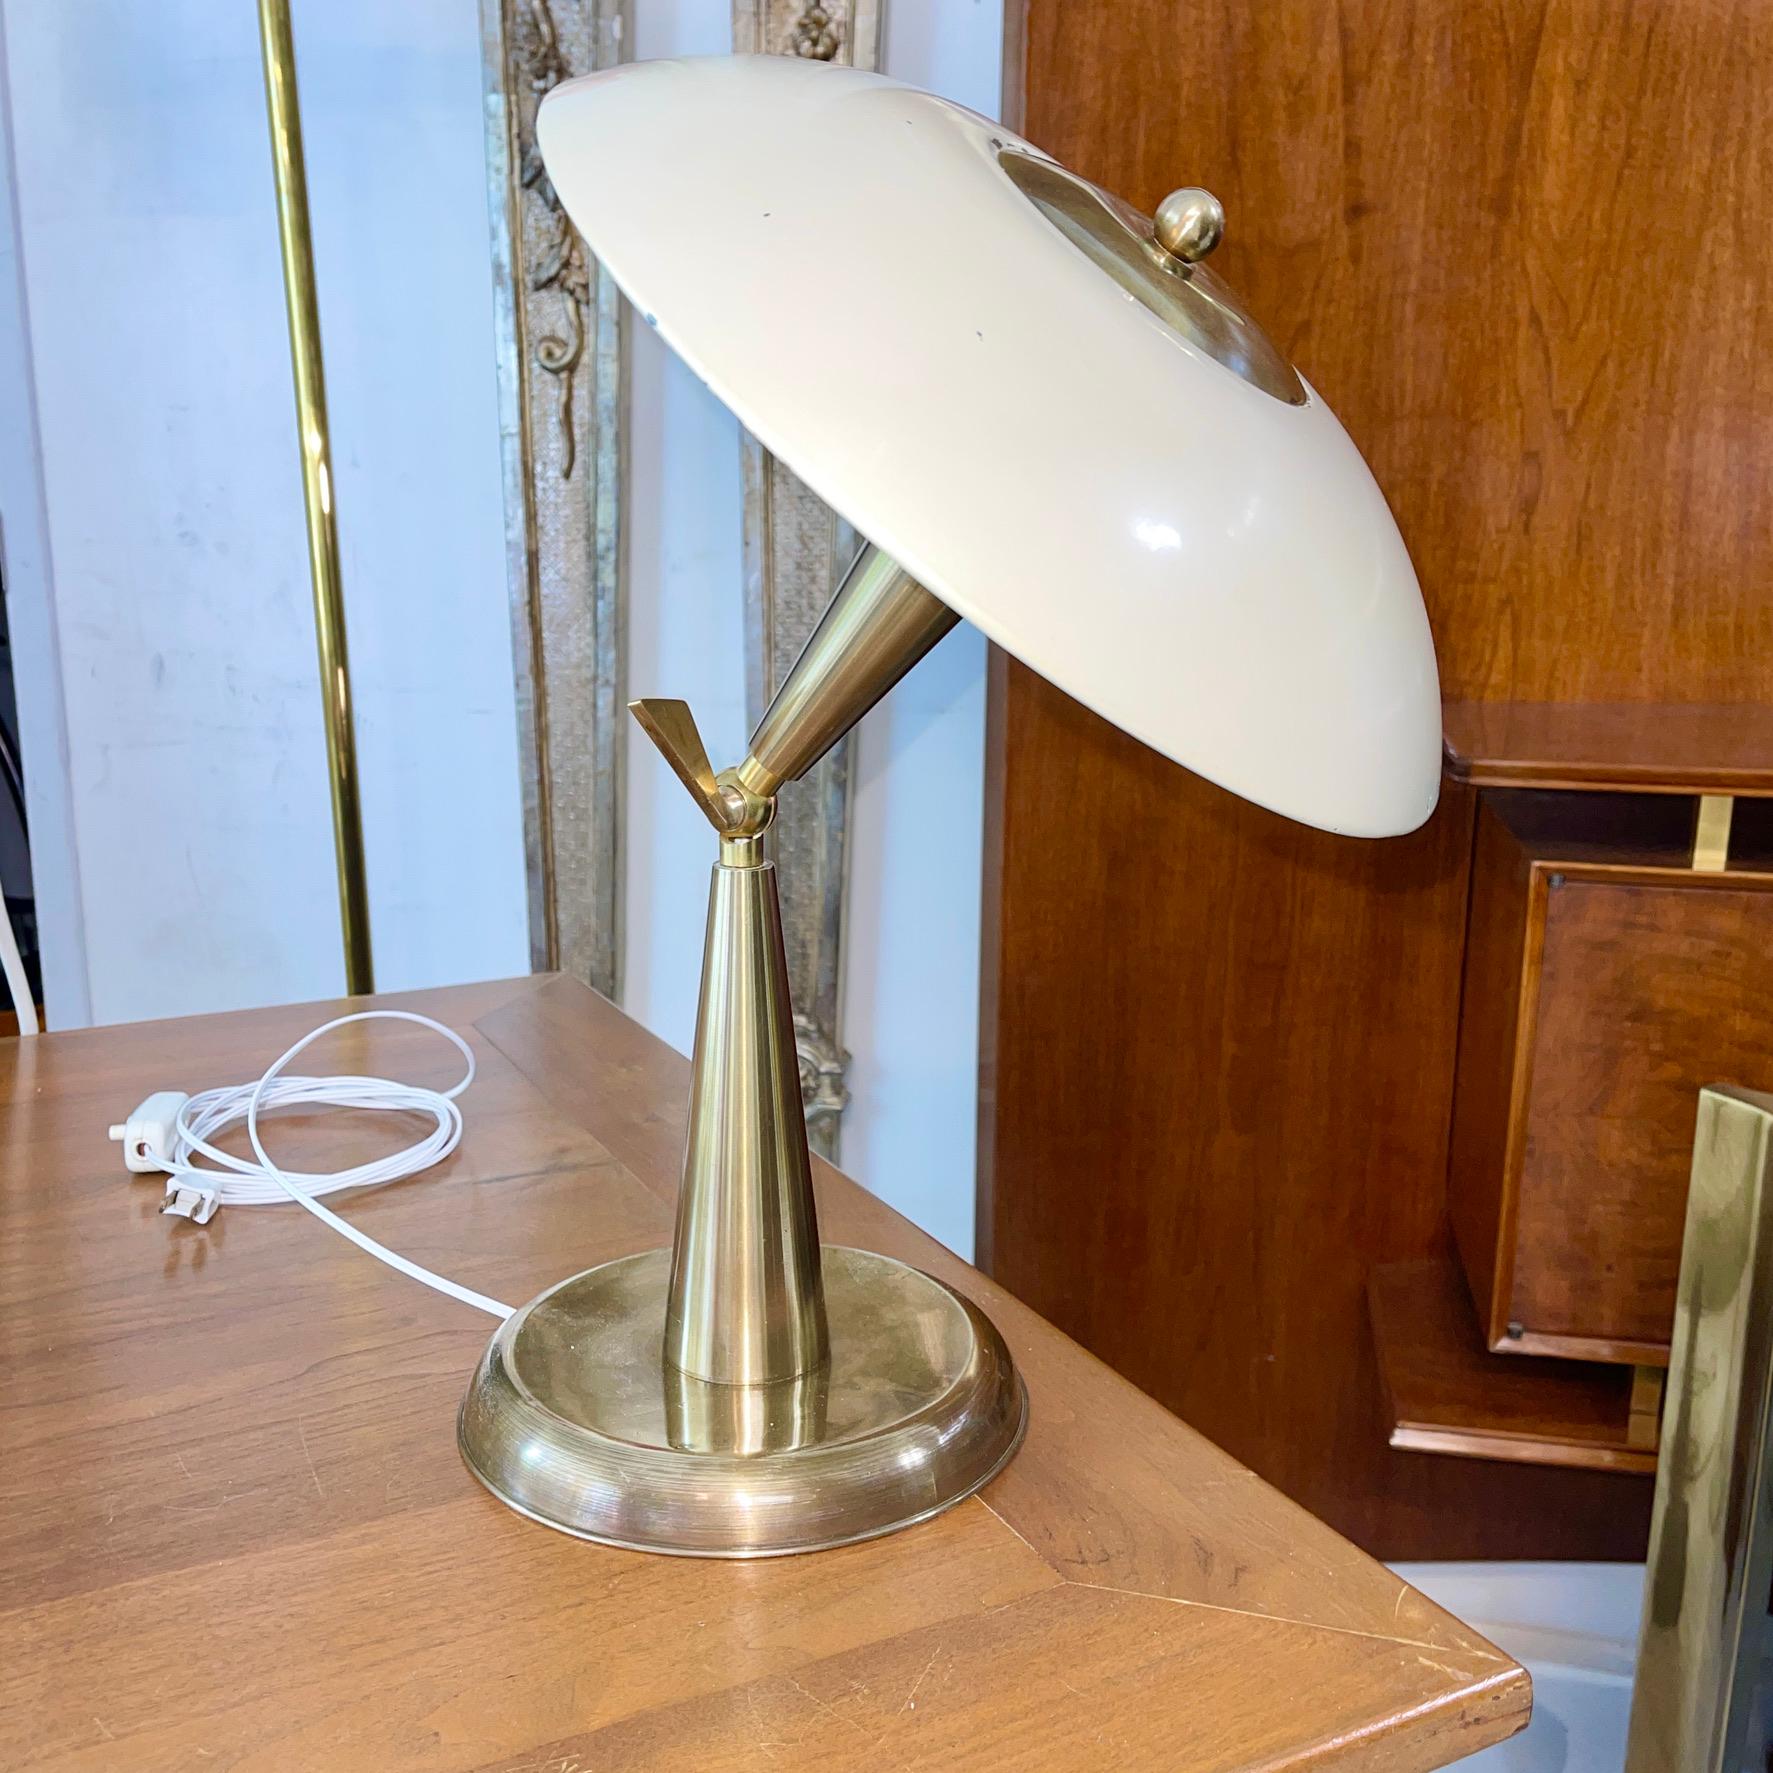 1950's Italian articulating desk lamp made of hefty solid brass and enameled steel reflector. The articulation is controlled by turning the key on the brass ball swivel joint between the double brass cones of the lamp stem. Range of movement is